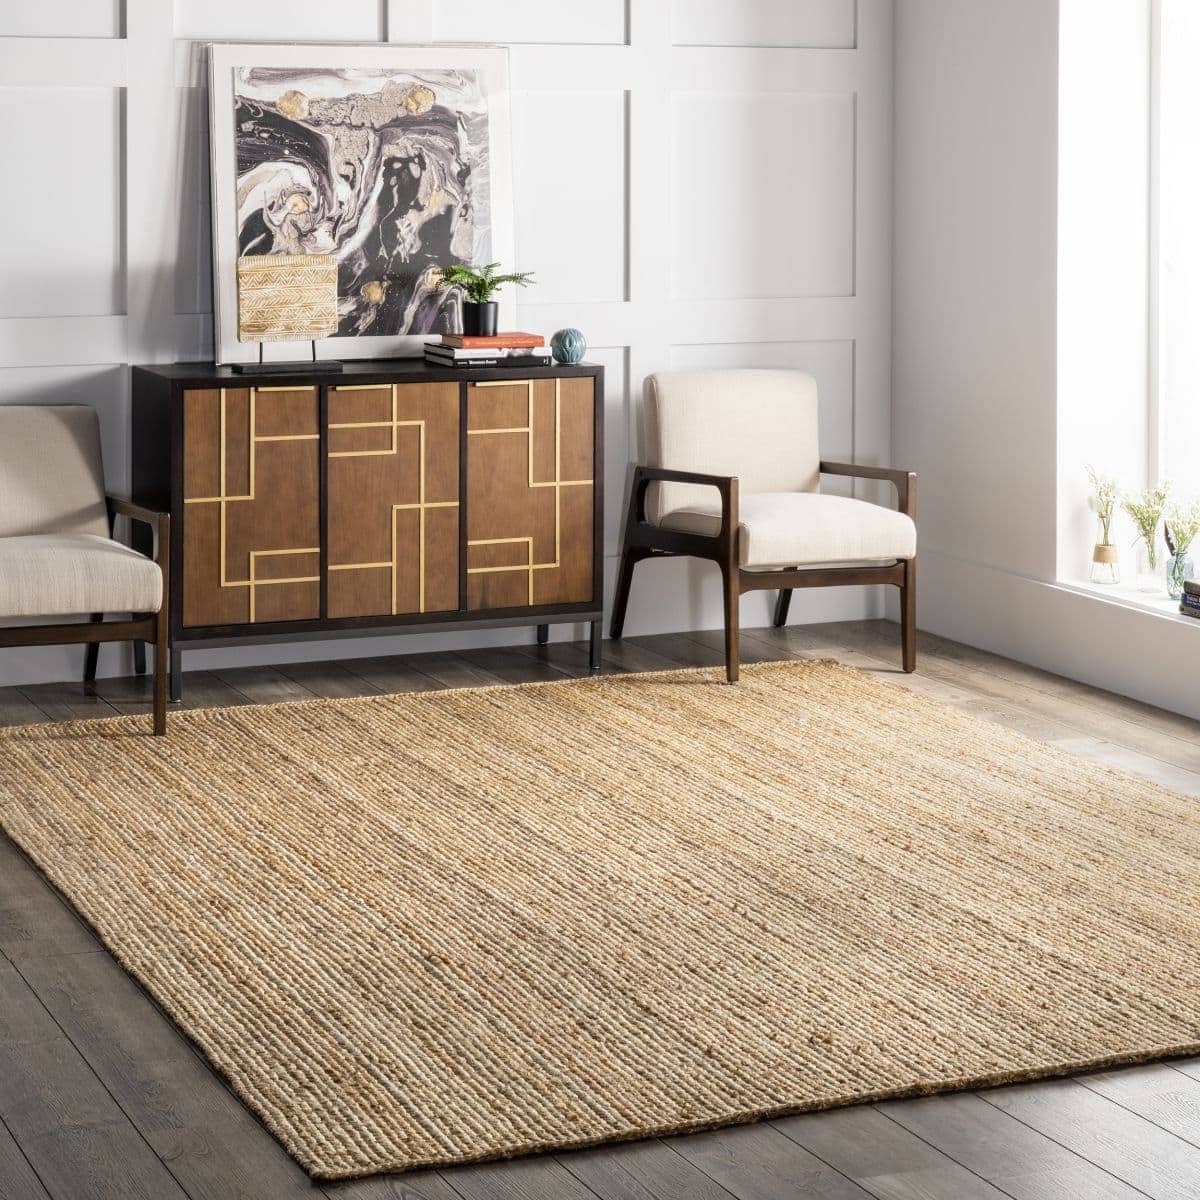 10 Best Rugs For High Traffic Areas, Best Flooring For High Traffic Living Room